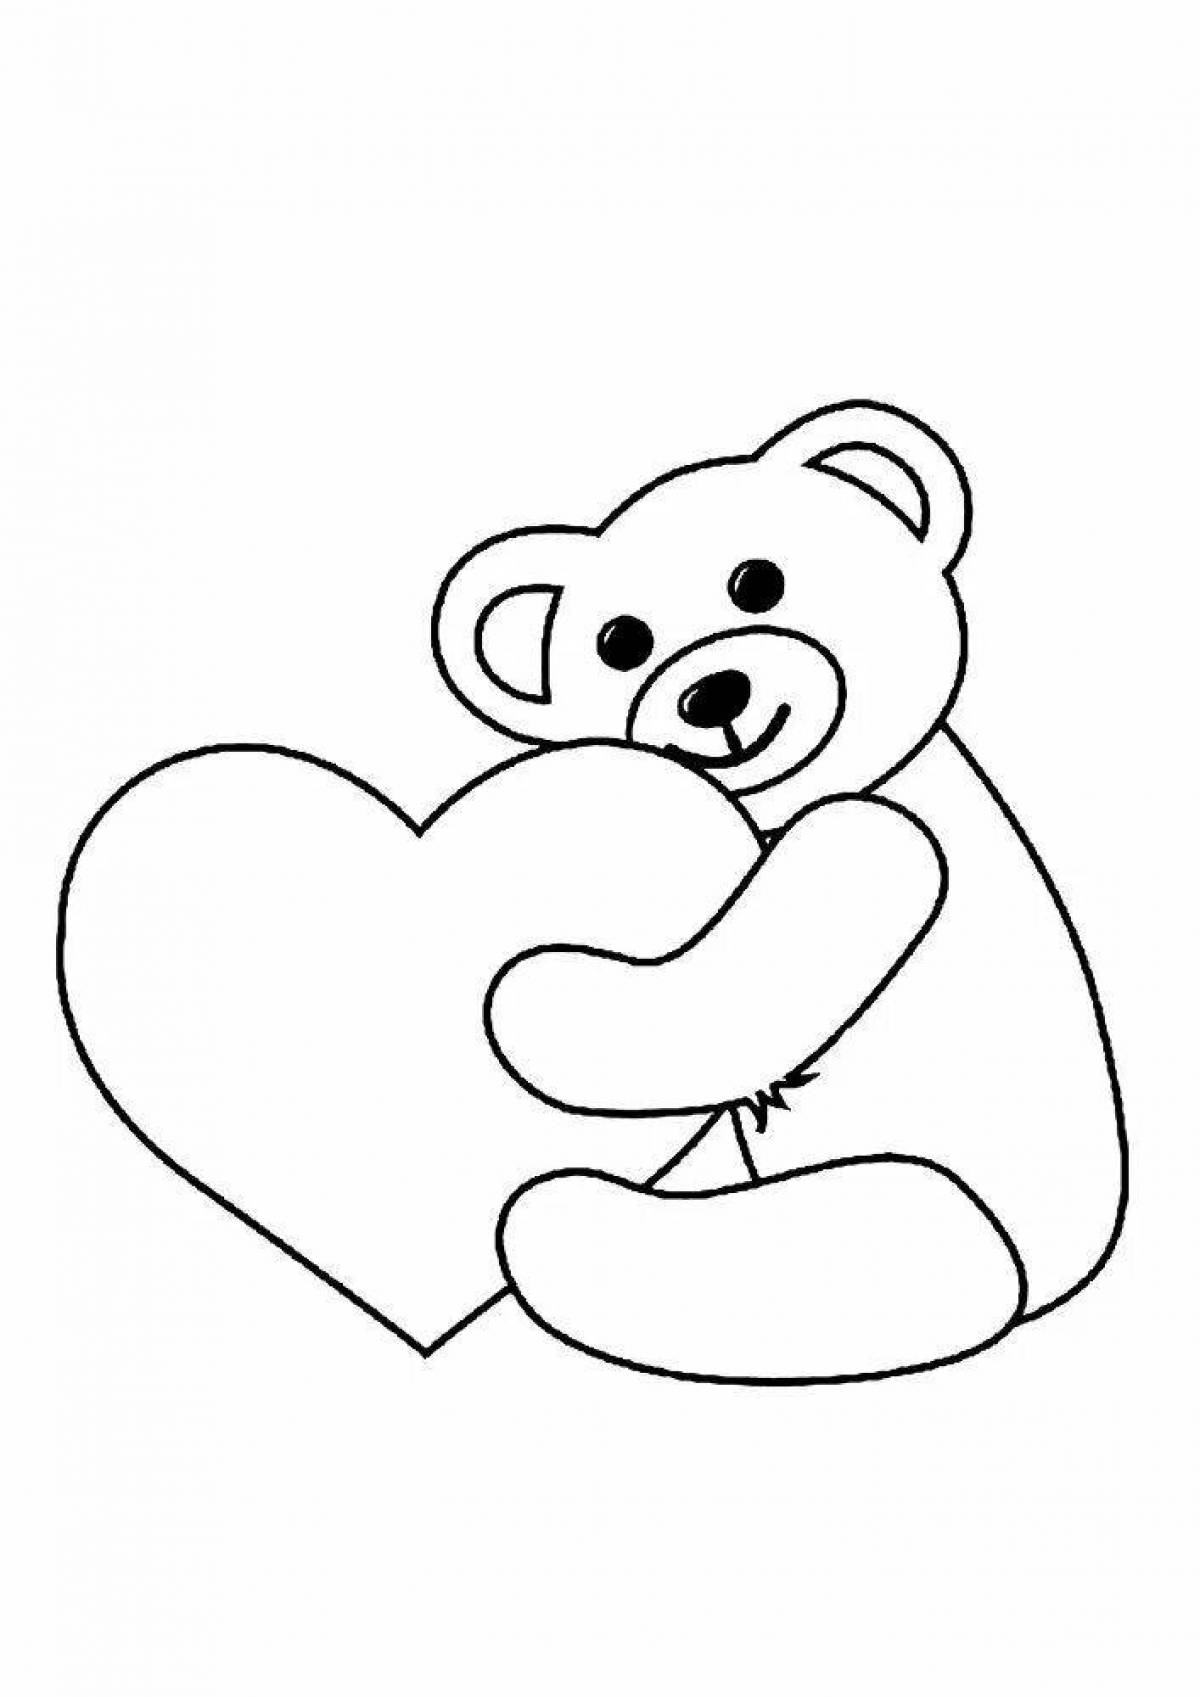 Coloring book bright teddy bear with a heart